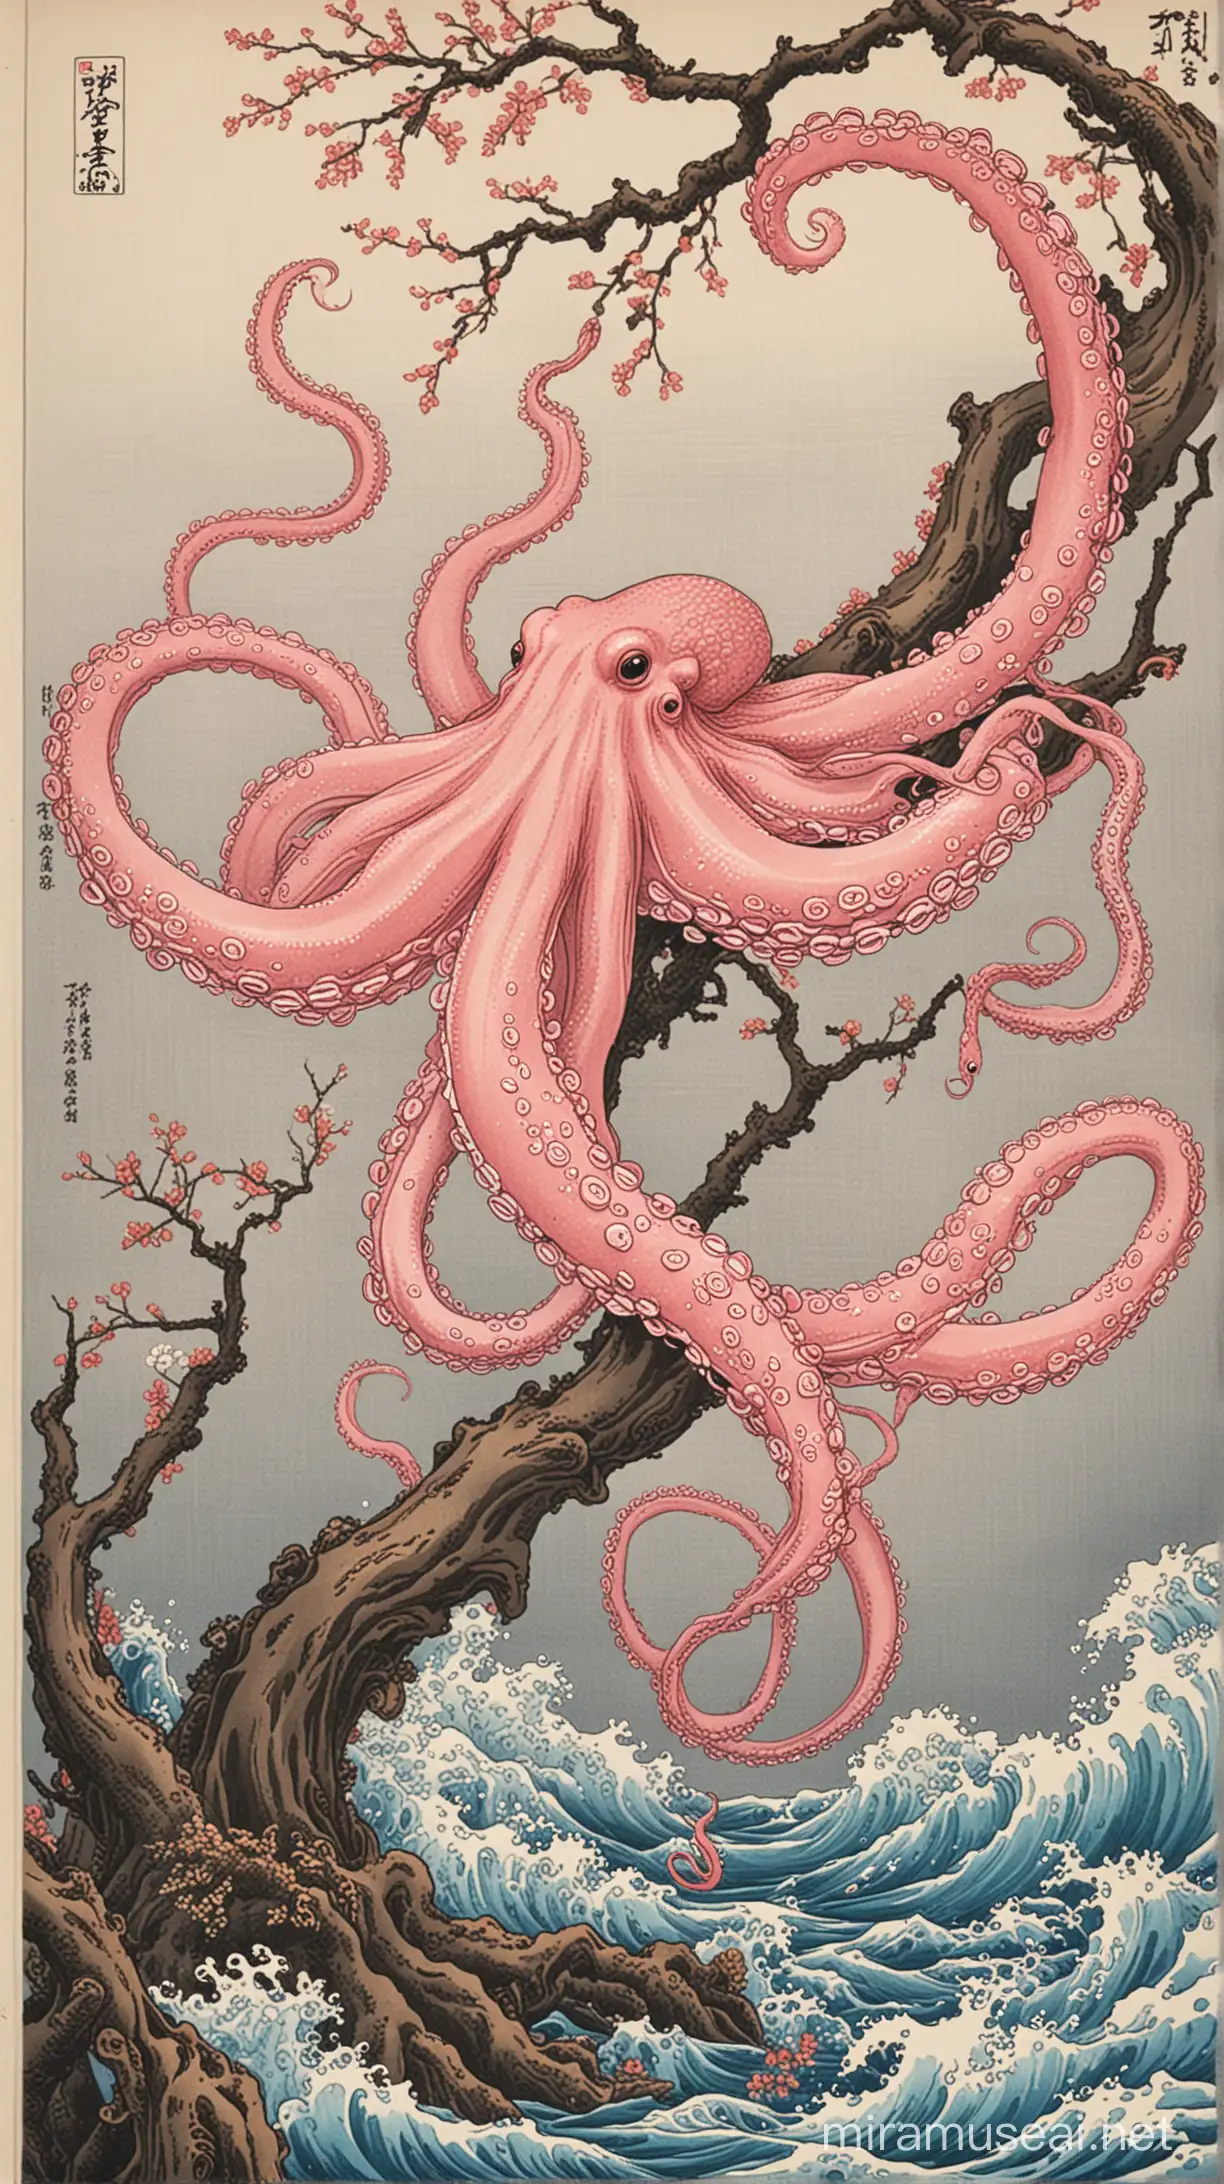 A pink octopus has its hands out of the water. A snake is hanging from a tree branch at the top of the page. Hokusai style